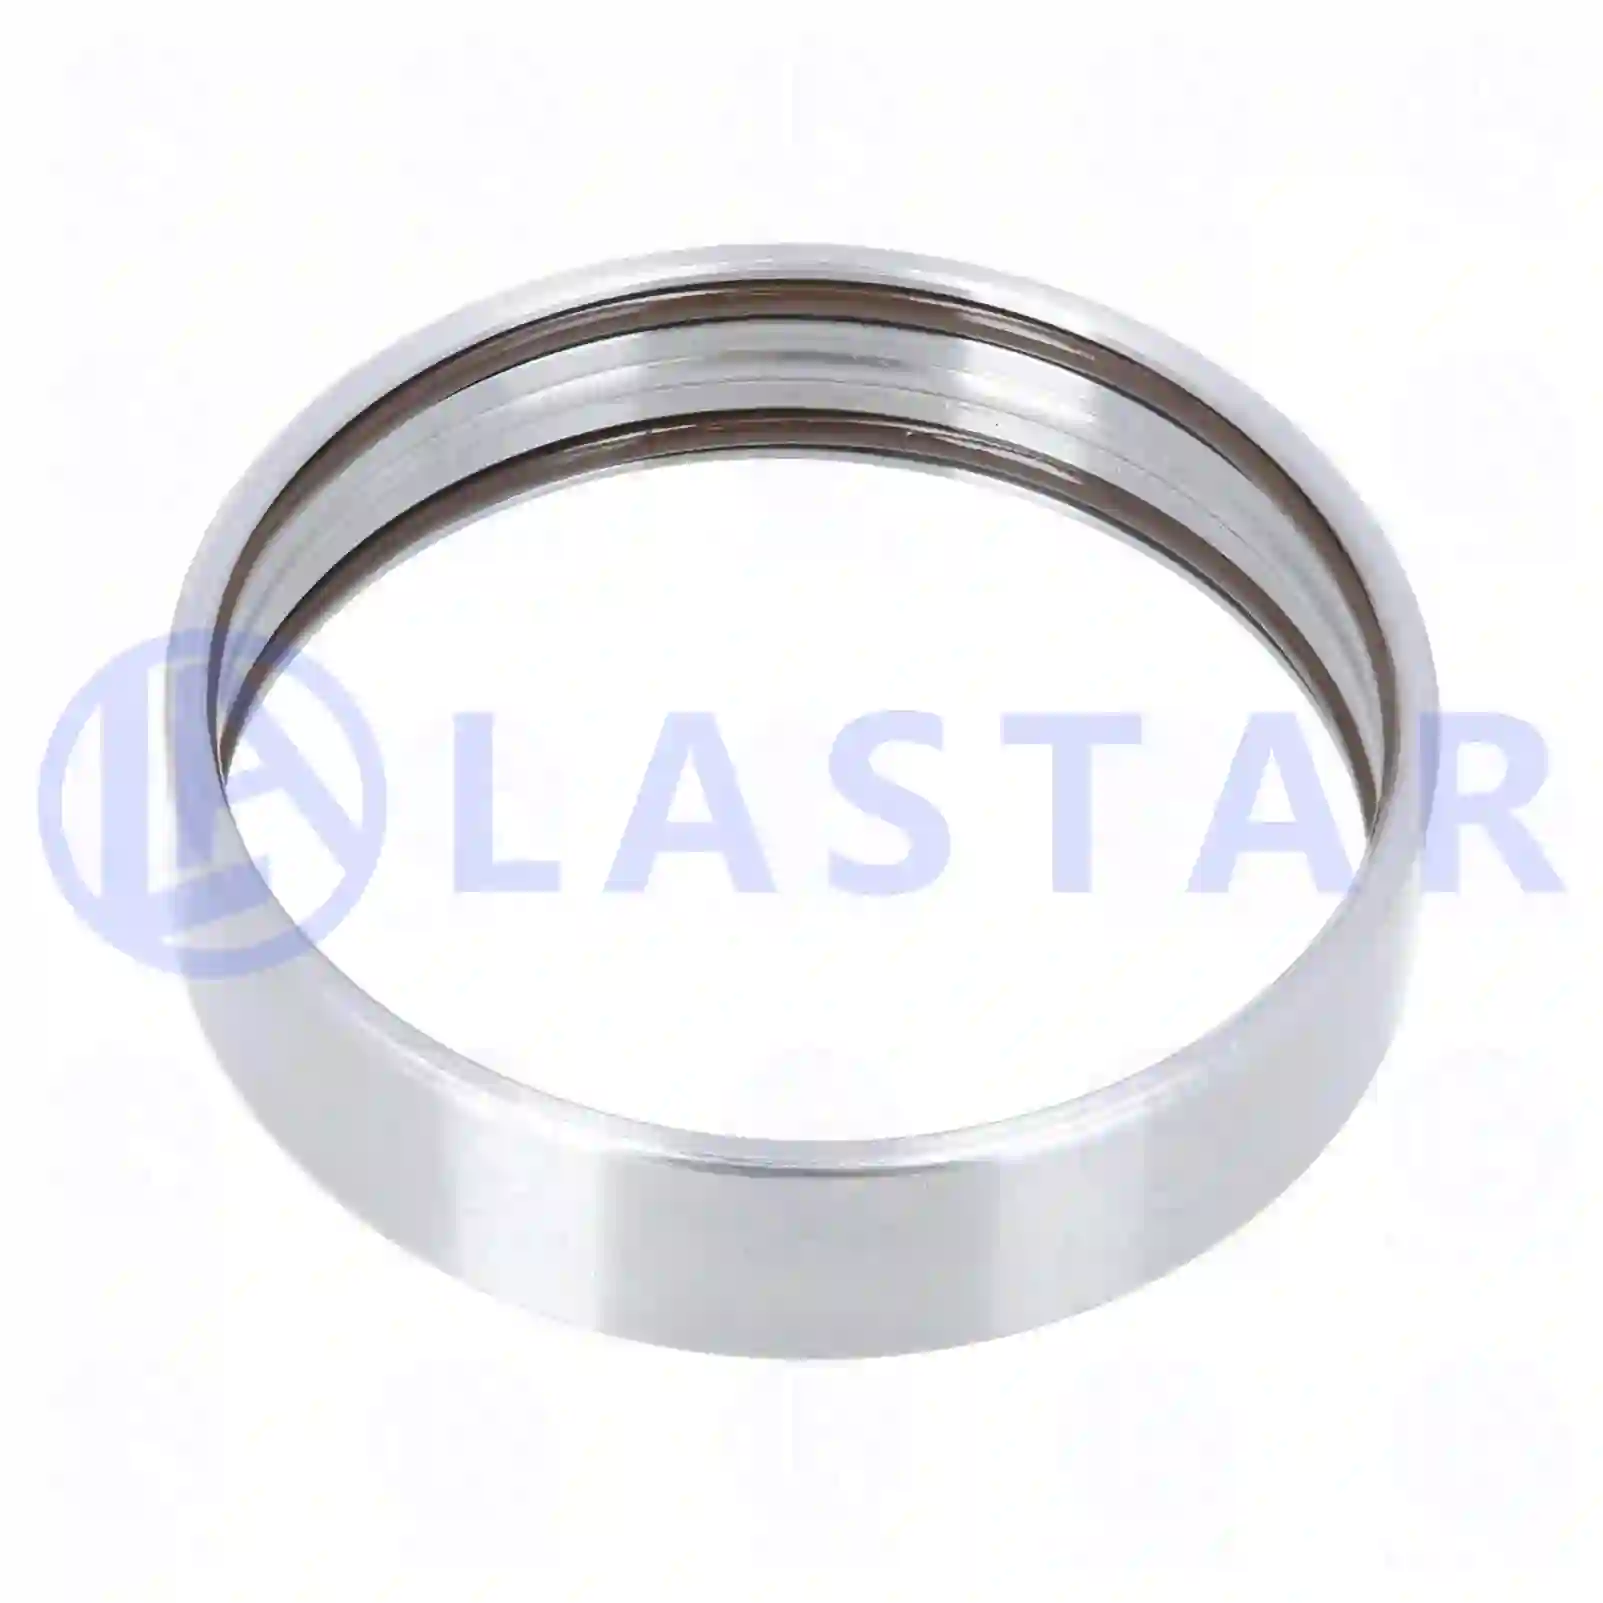 Seal ring, 77726408, 7401078356, 1078356, ||  77726408 Lastar Spare Part | Truck Spare Parts, Auotomotive Spare Parts Seal ring, 77726408, 7401078356, 1078356, ||  77726408 Lastar Spare Part | Truck Spare Parts, Auotomotive Spare Parts